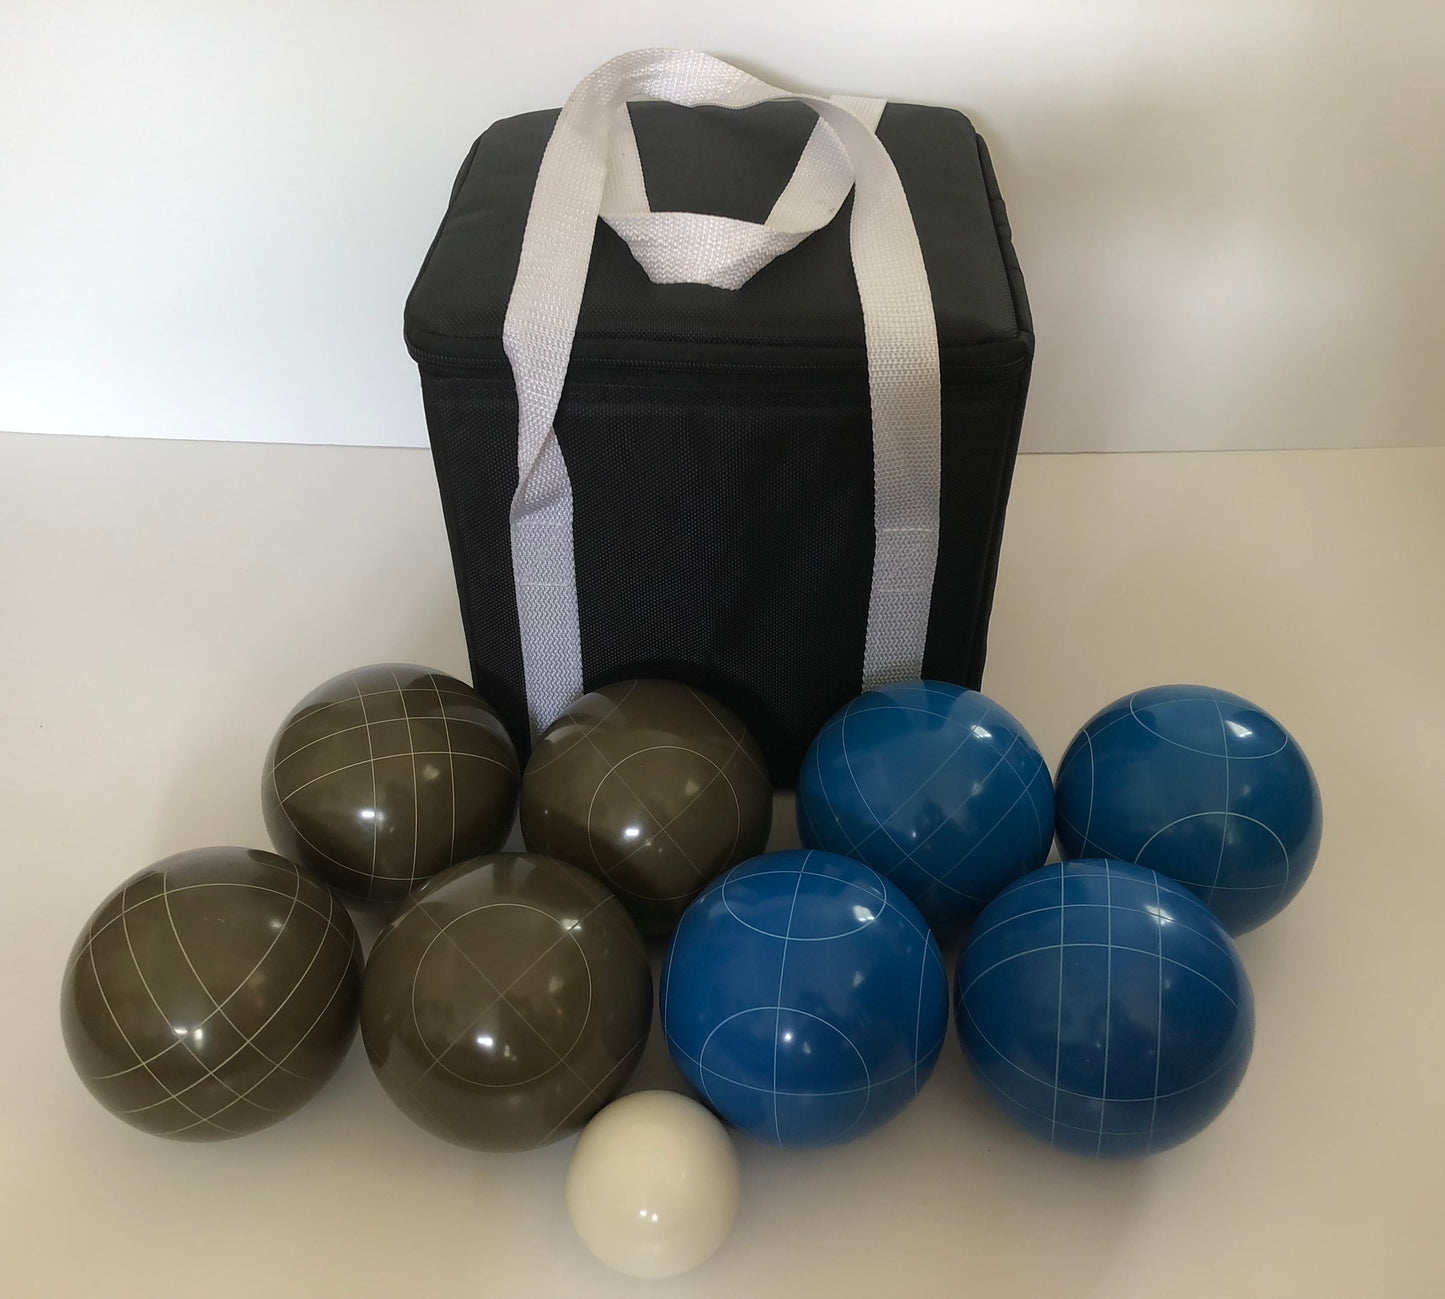 107mm Bocce Olive Brown and Blue Balls with Black Bag